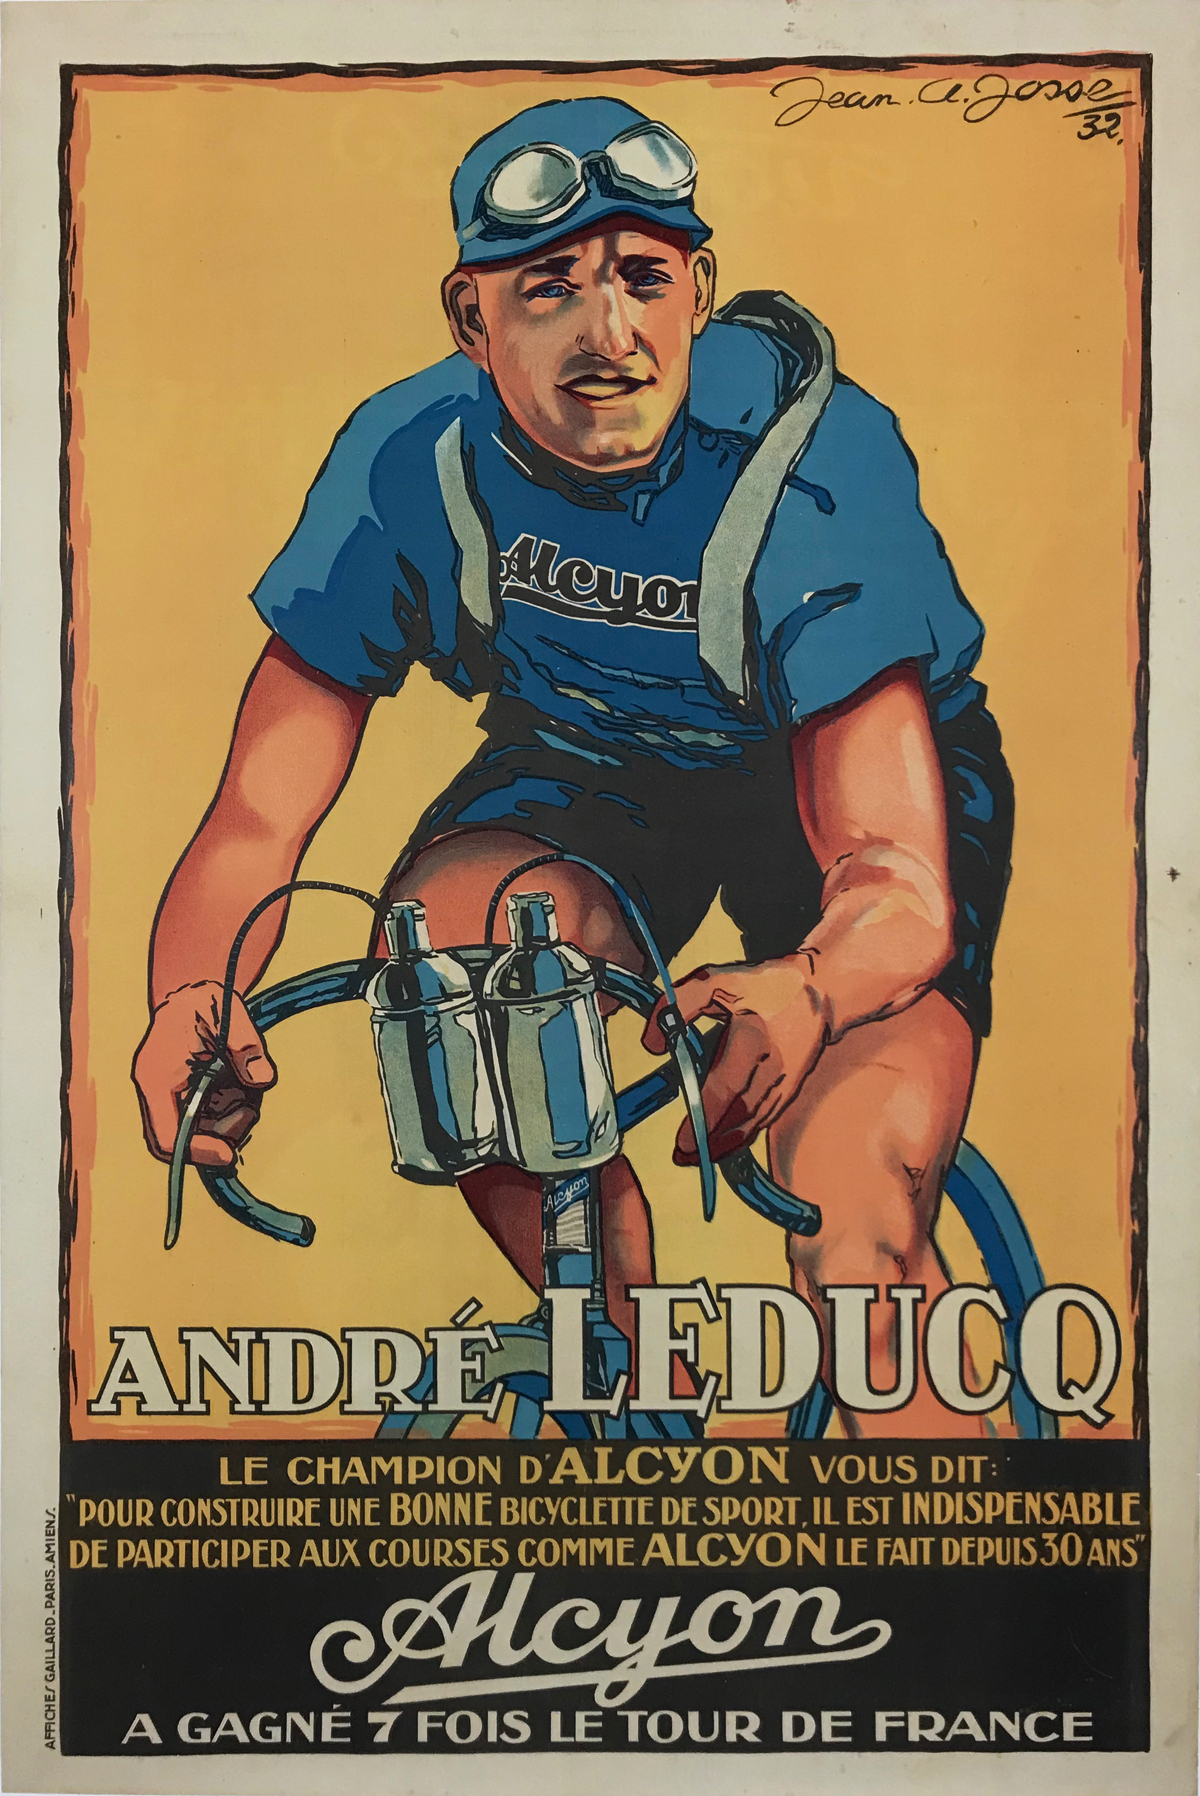 Andre Leducq Le Champion D'Alcyon Cycles  by Jean Alexander Josse Original 1932 Vintage French Bicycle Company Advertisement Poster Linen Backed.
Andre Le Duc Was a Three Time Tour de France Winner.